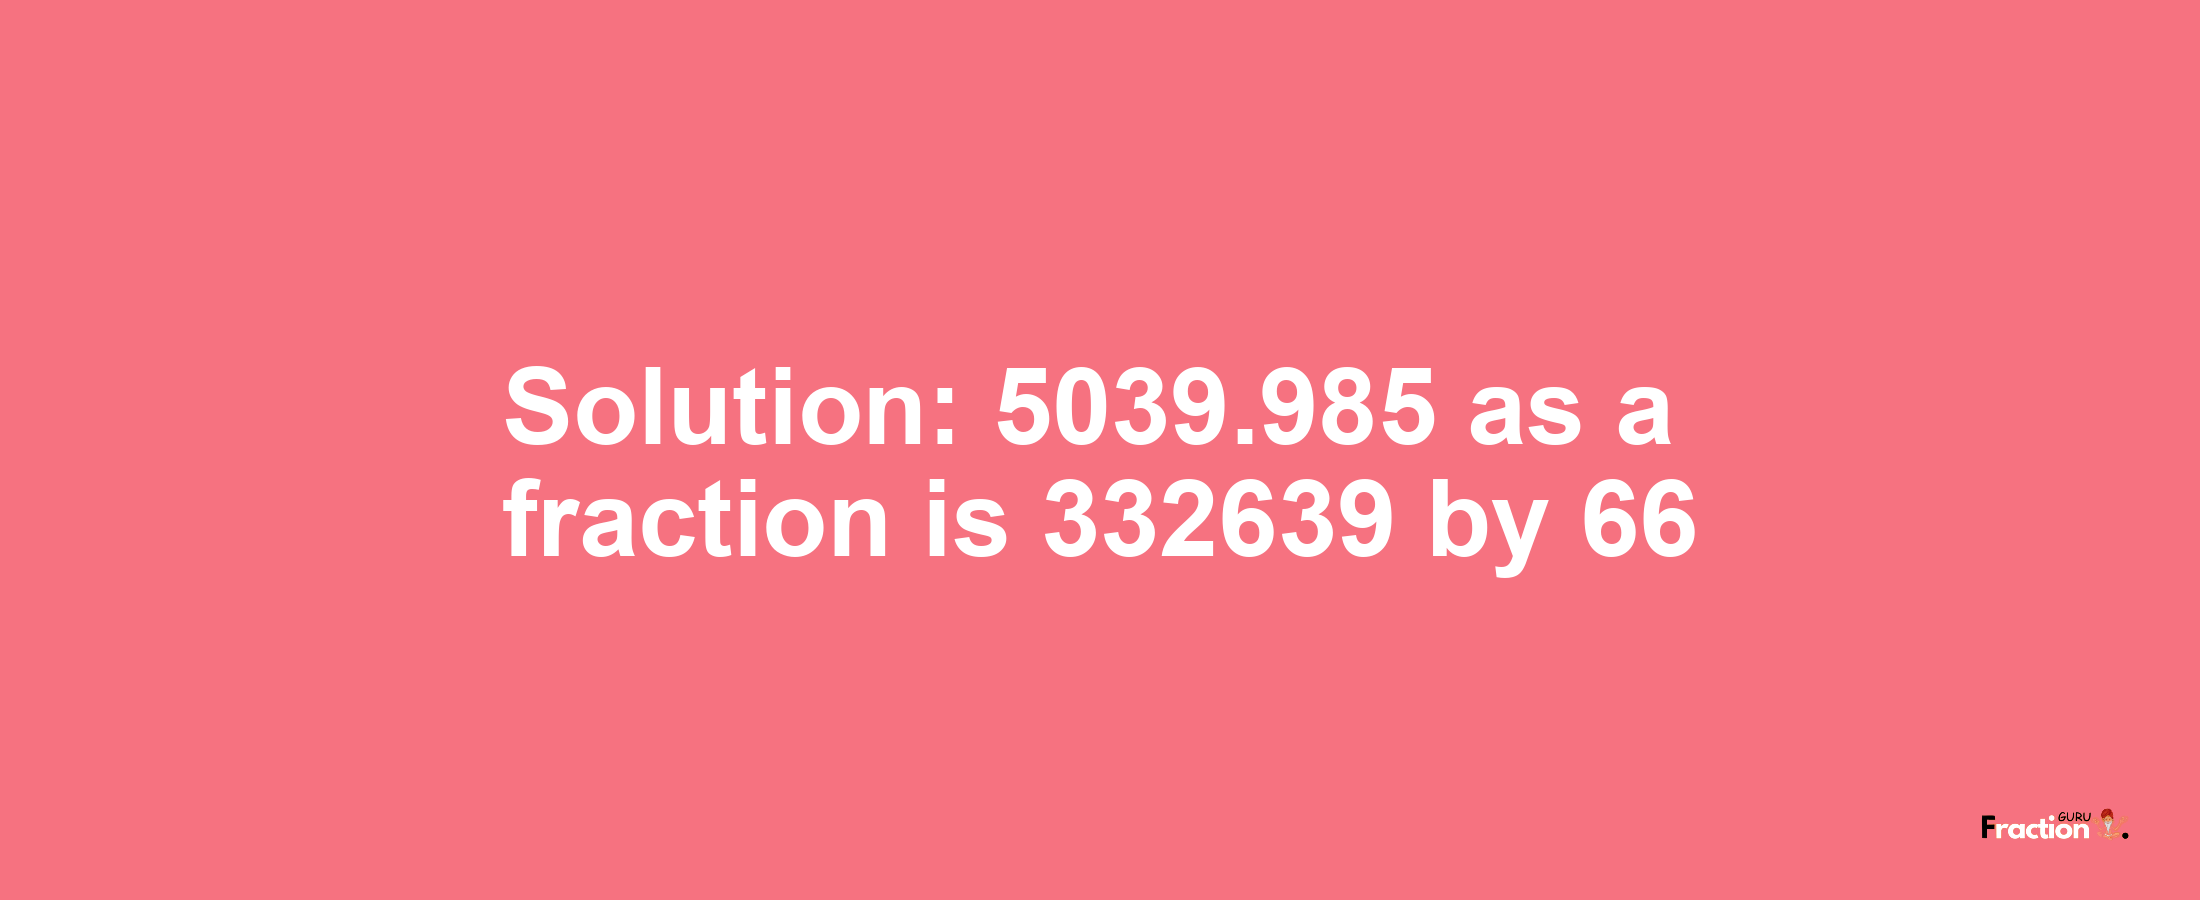 Solution:5039.985 as a fraction is 332639/66